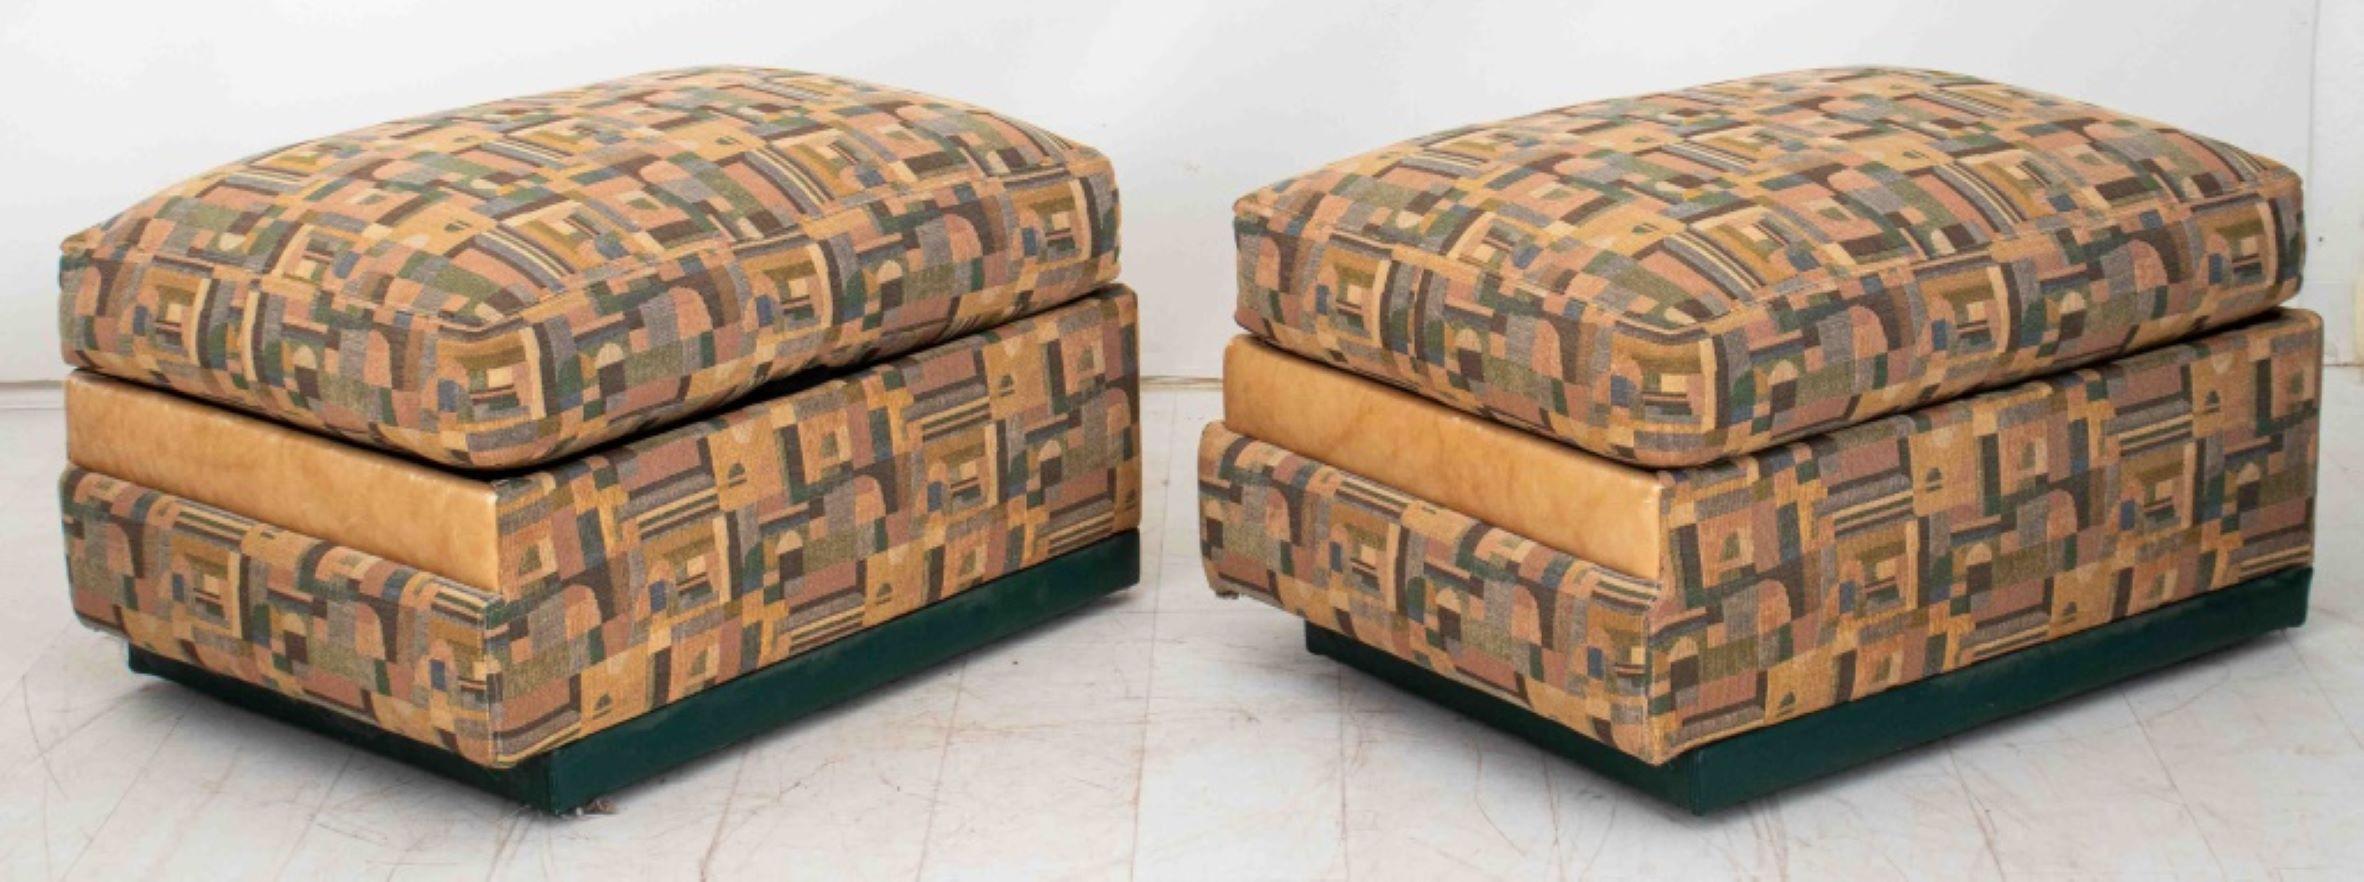 Upholstery Storage Ottoman Stools on Casters, 2 For Sale